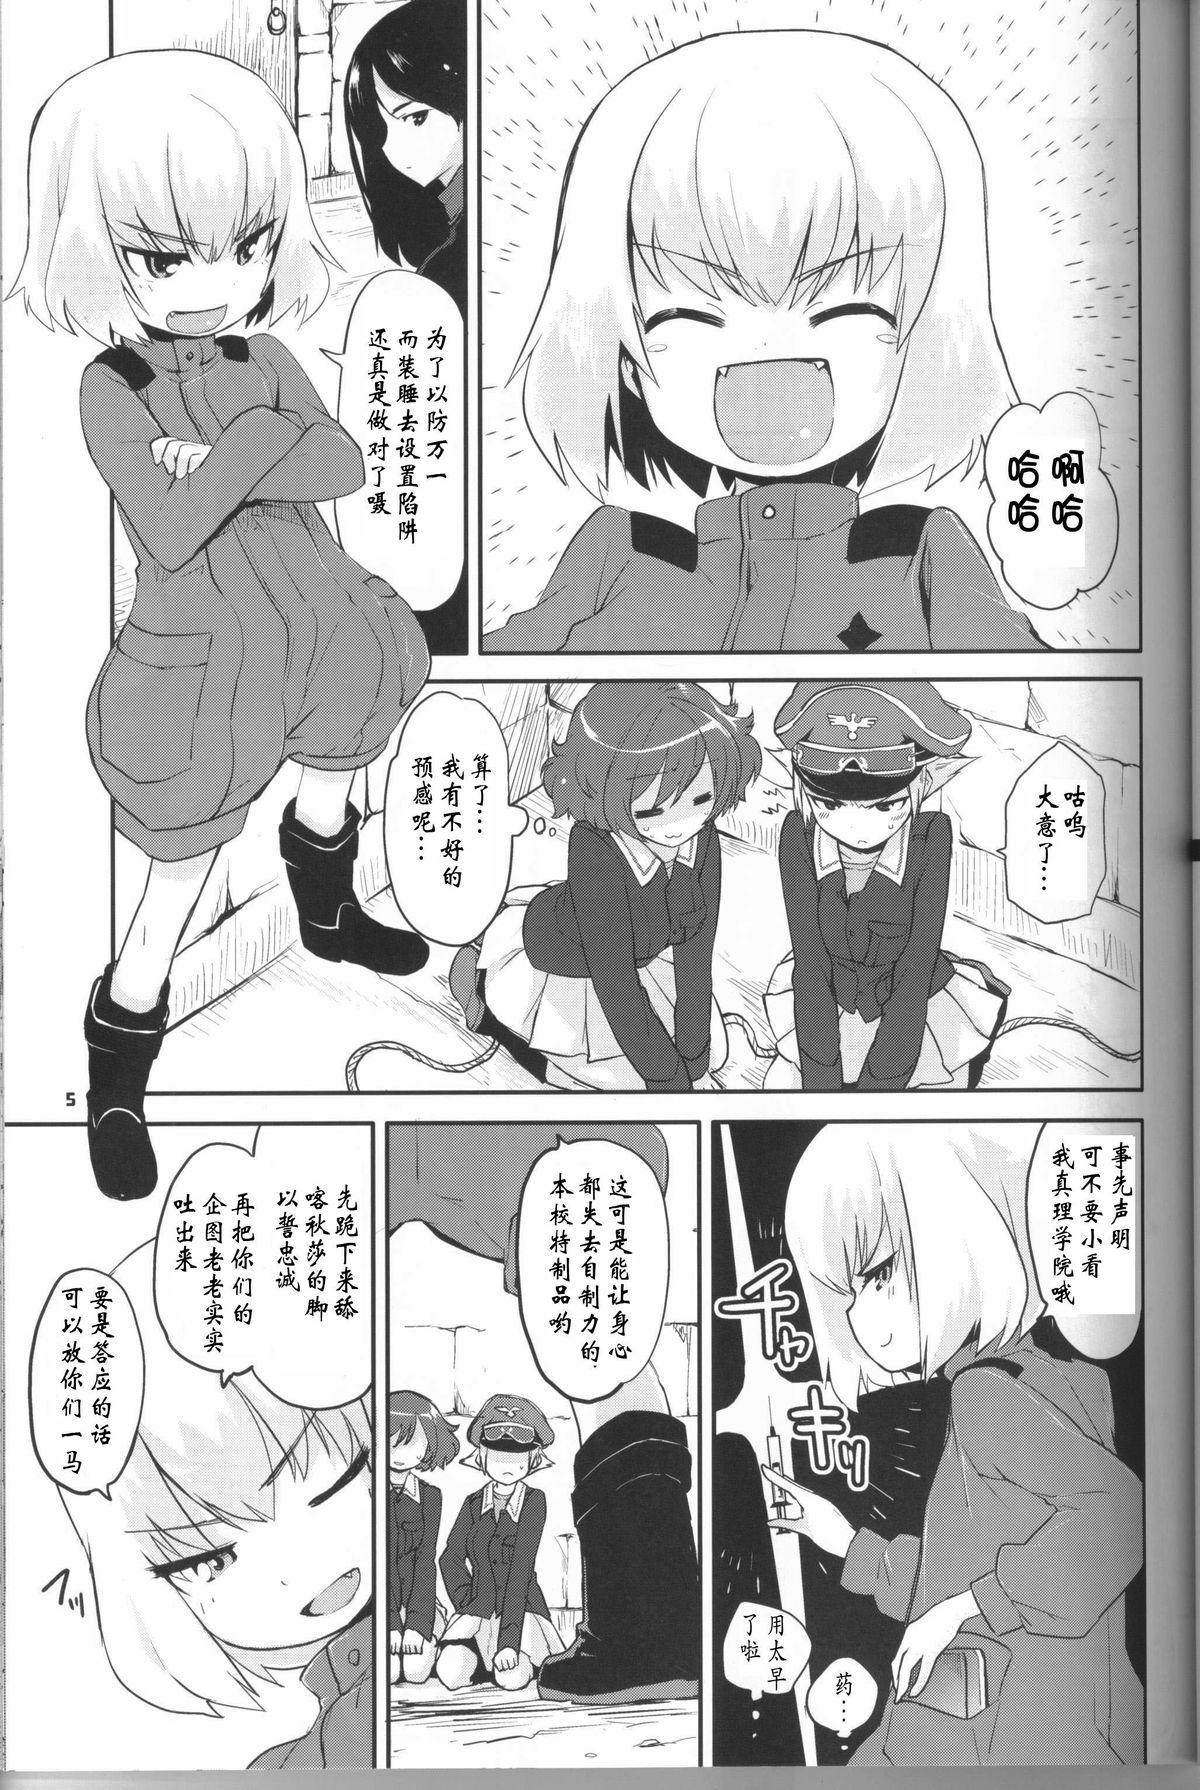 Roludo The General Frost Has Come! - Girls und panzer Gay Physicals - Page 4